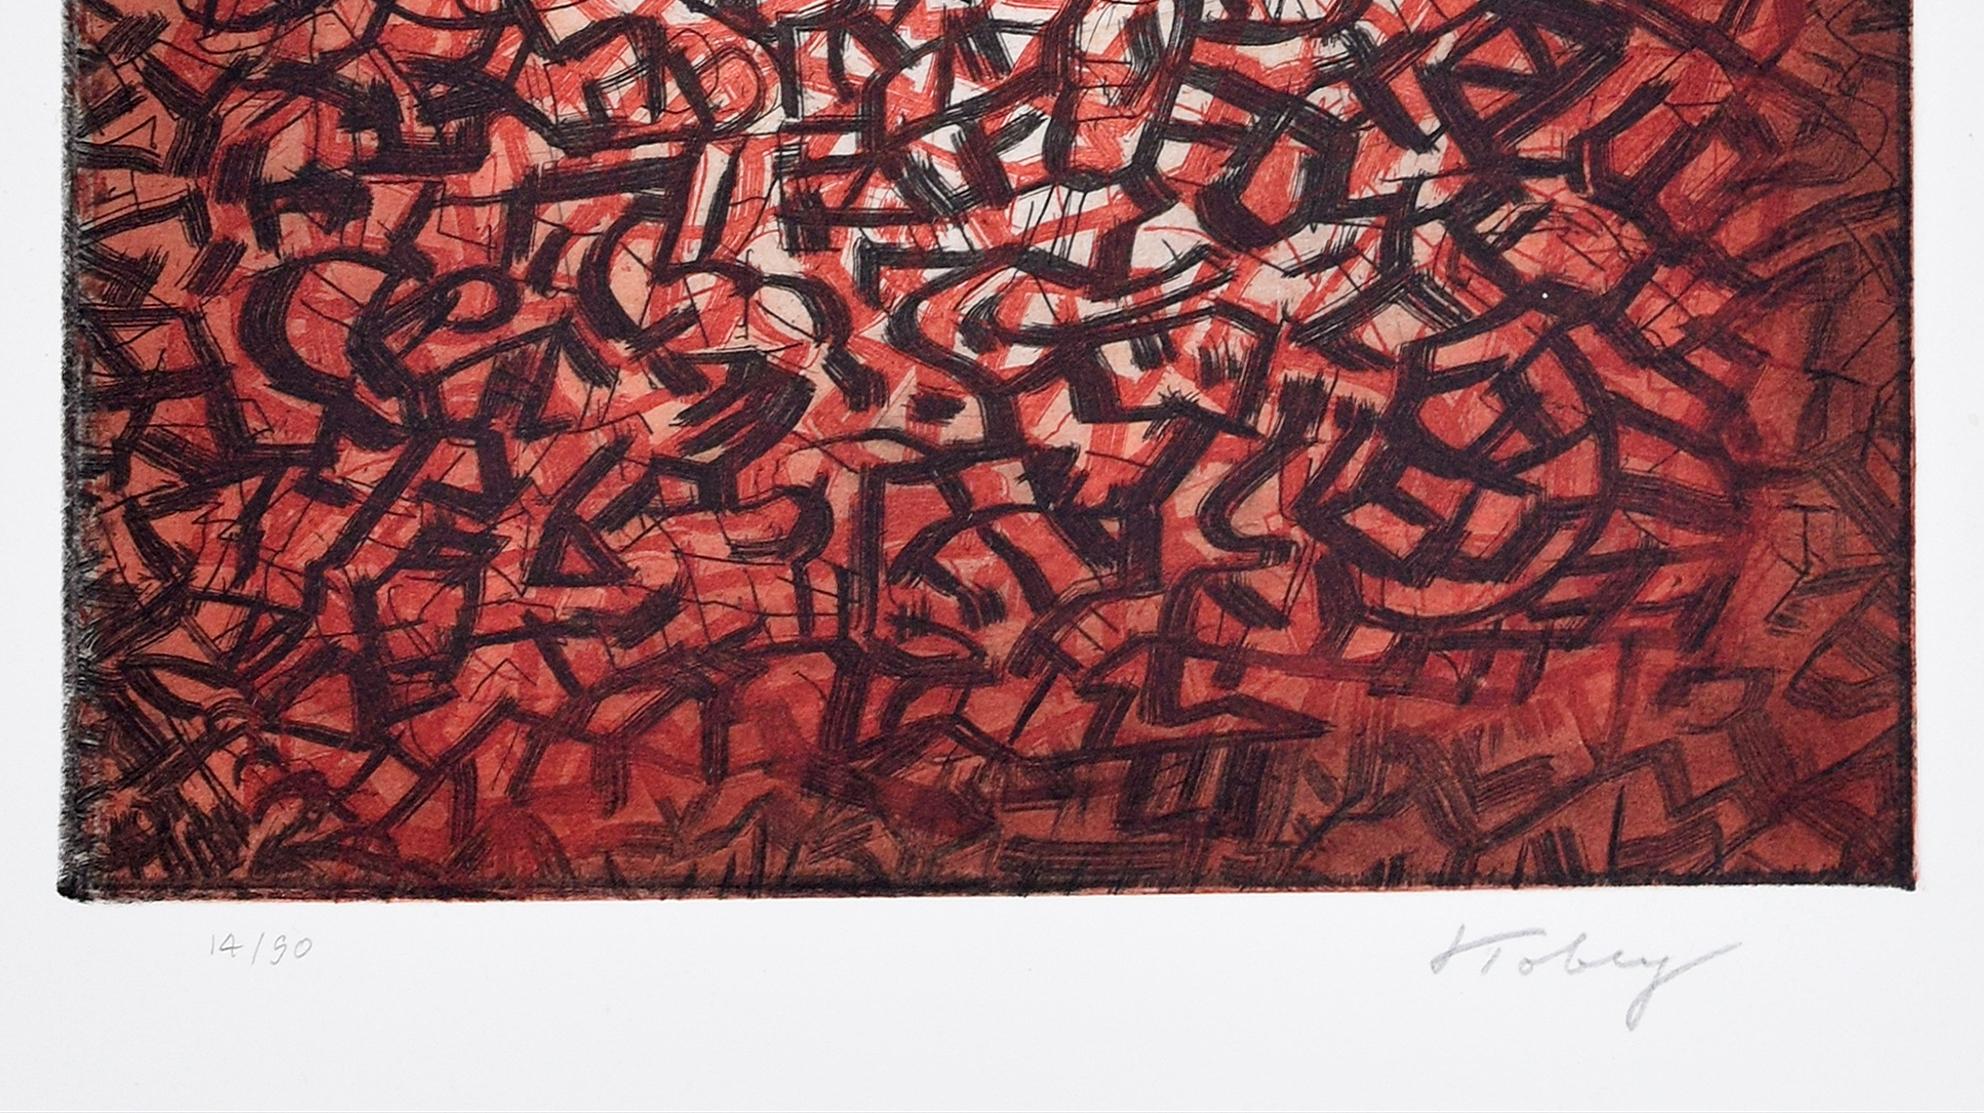 Awaking Earth - Original Etching on Paper by Mark Tobey - 1974 2